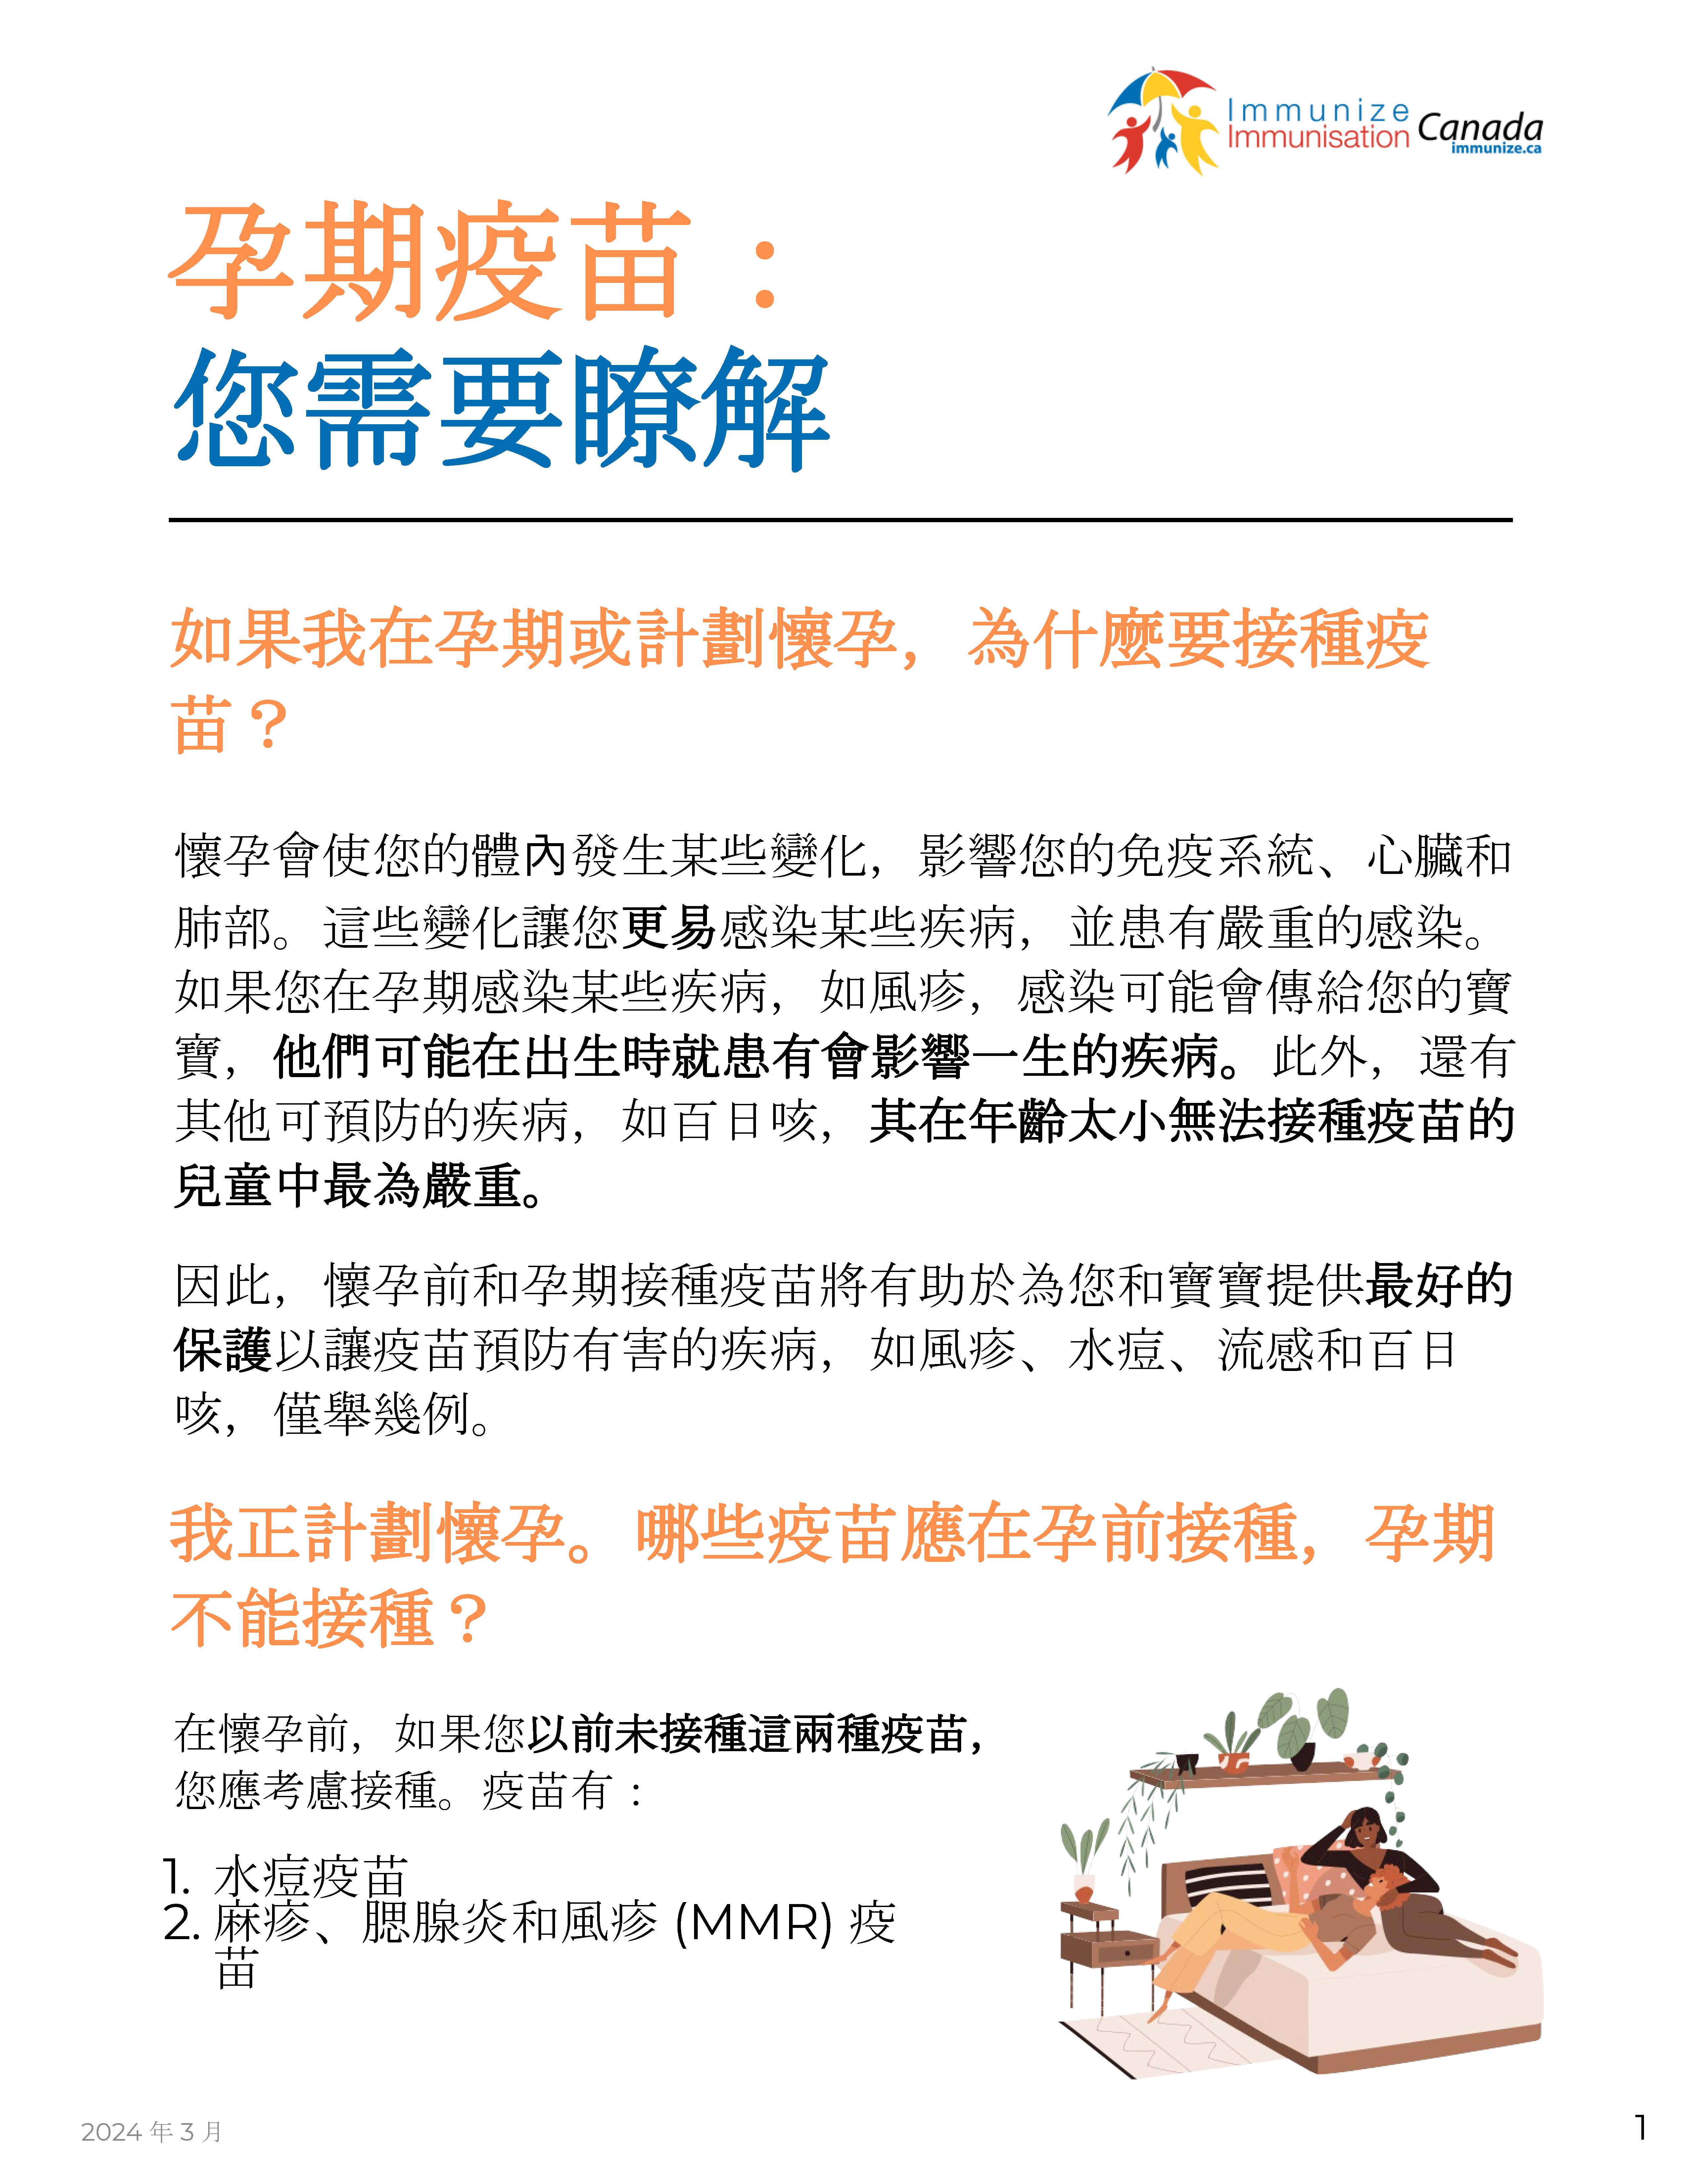 Vaccines in Pregnancy: What you need to know (factsheet in Cantonese)